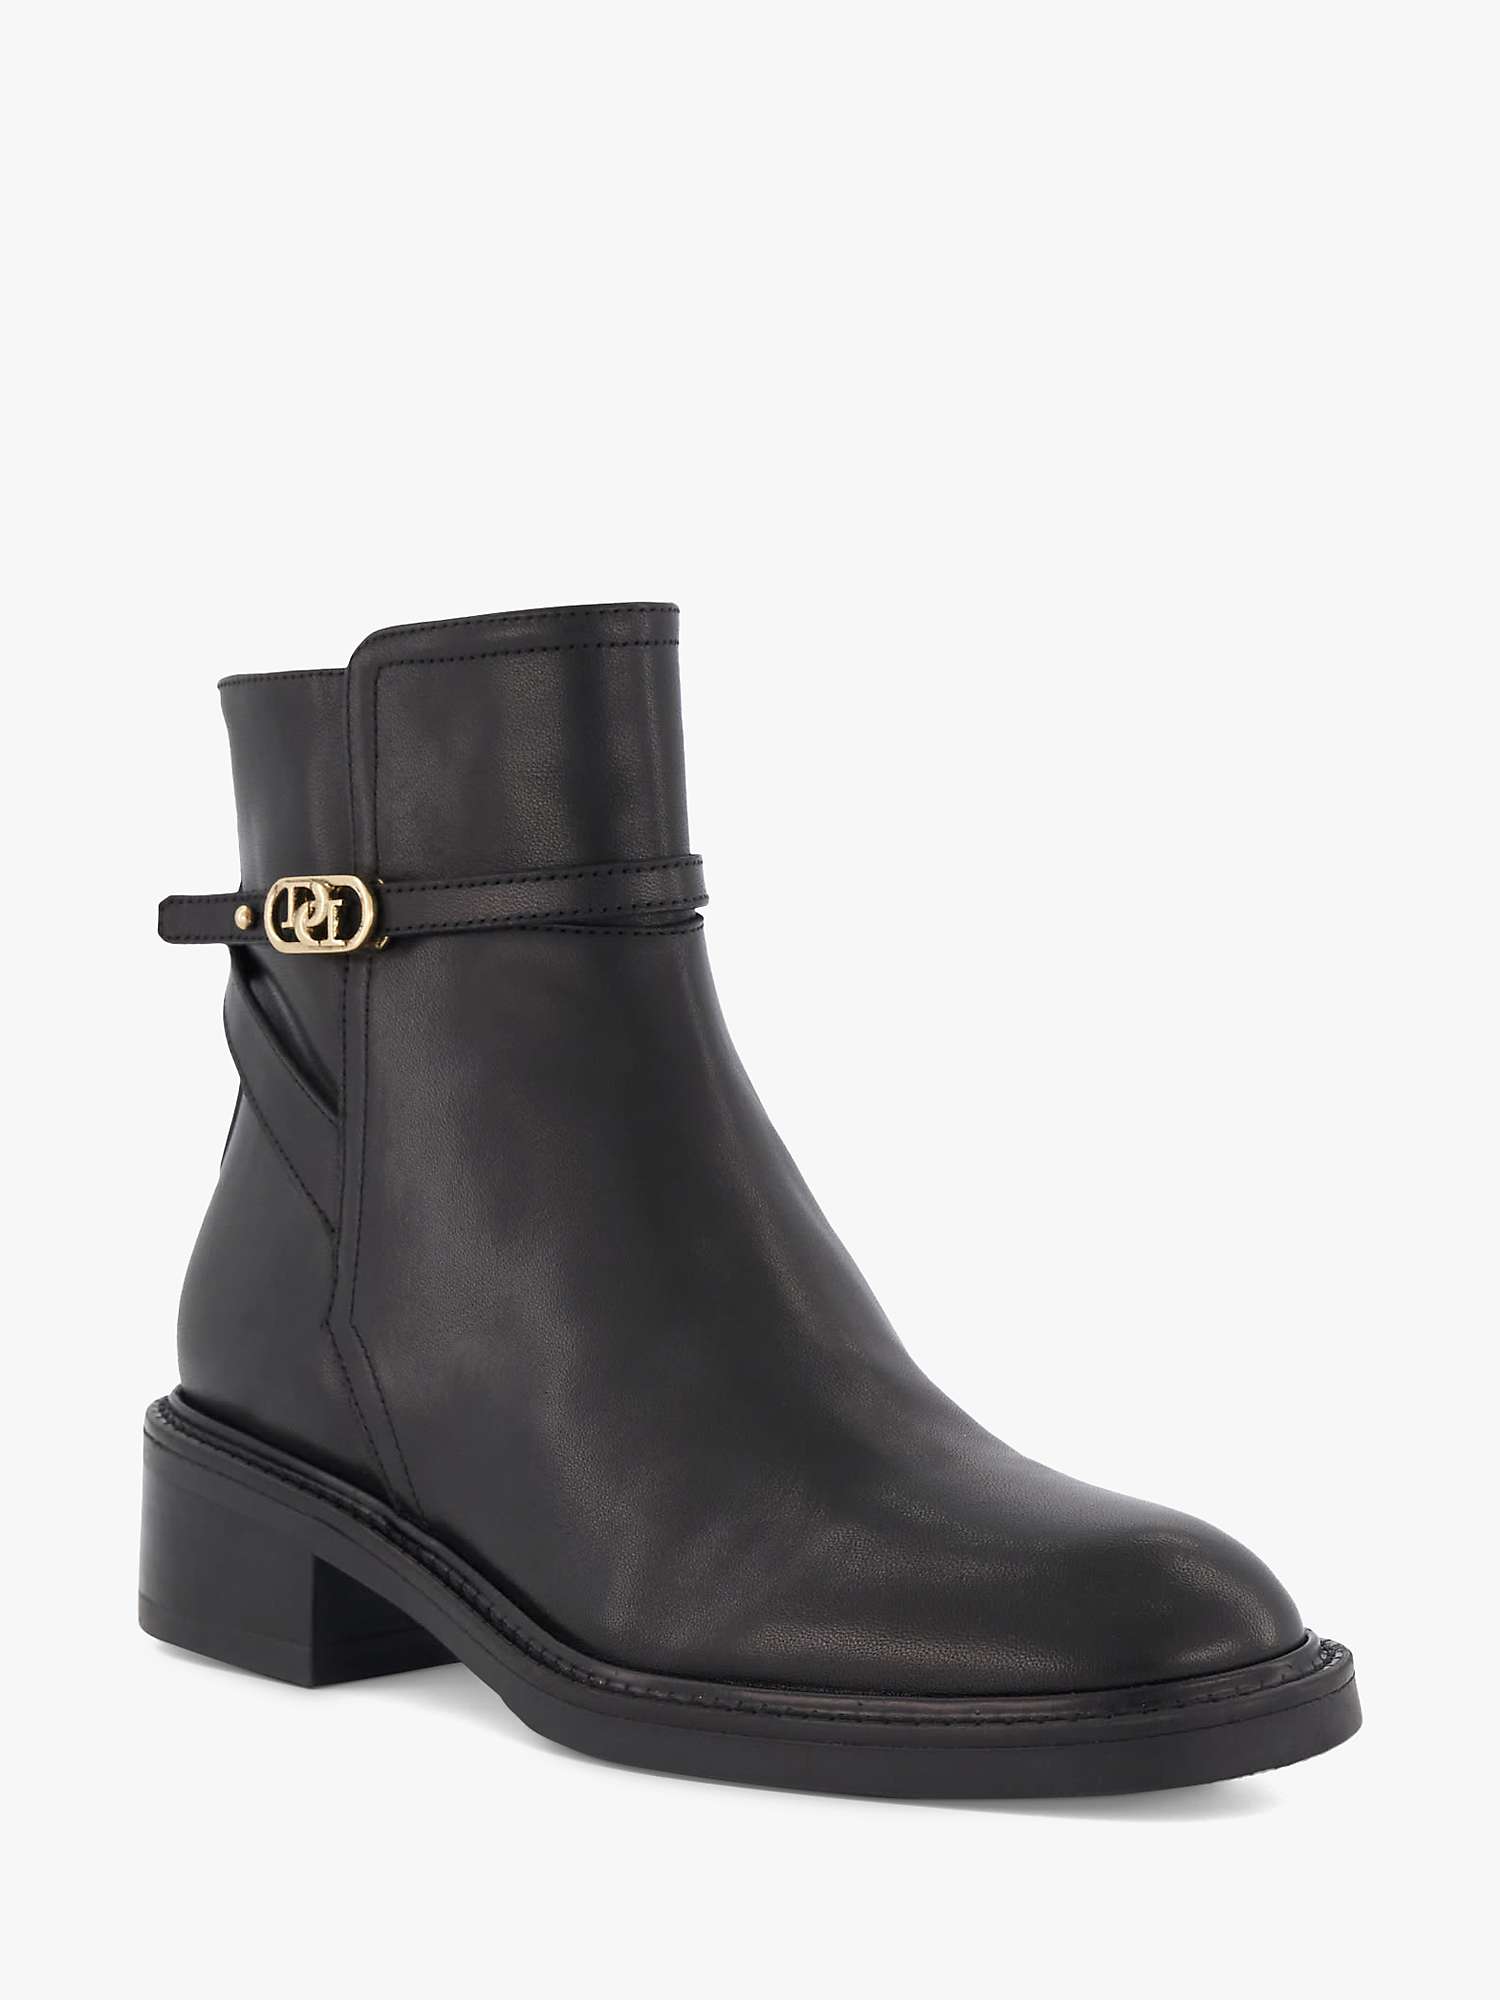 Buy Dune Praising Leather Ankle Boots, Black Online at johnlewis.com